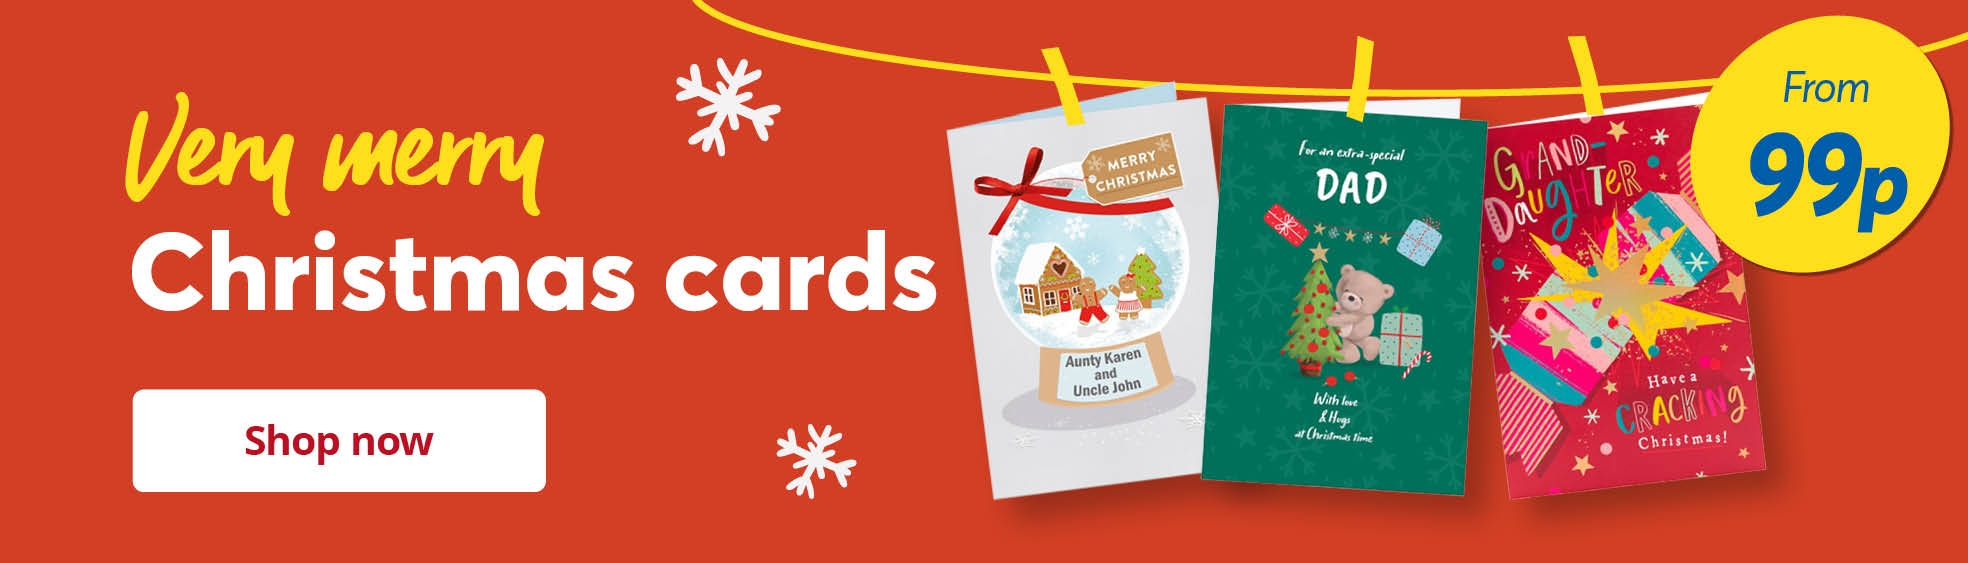 Christmas cards from 99p